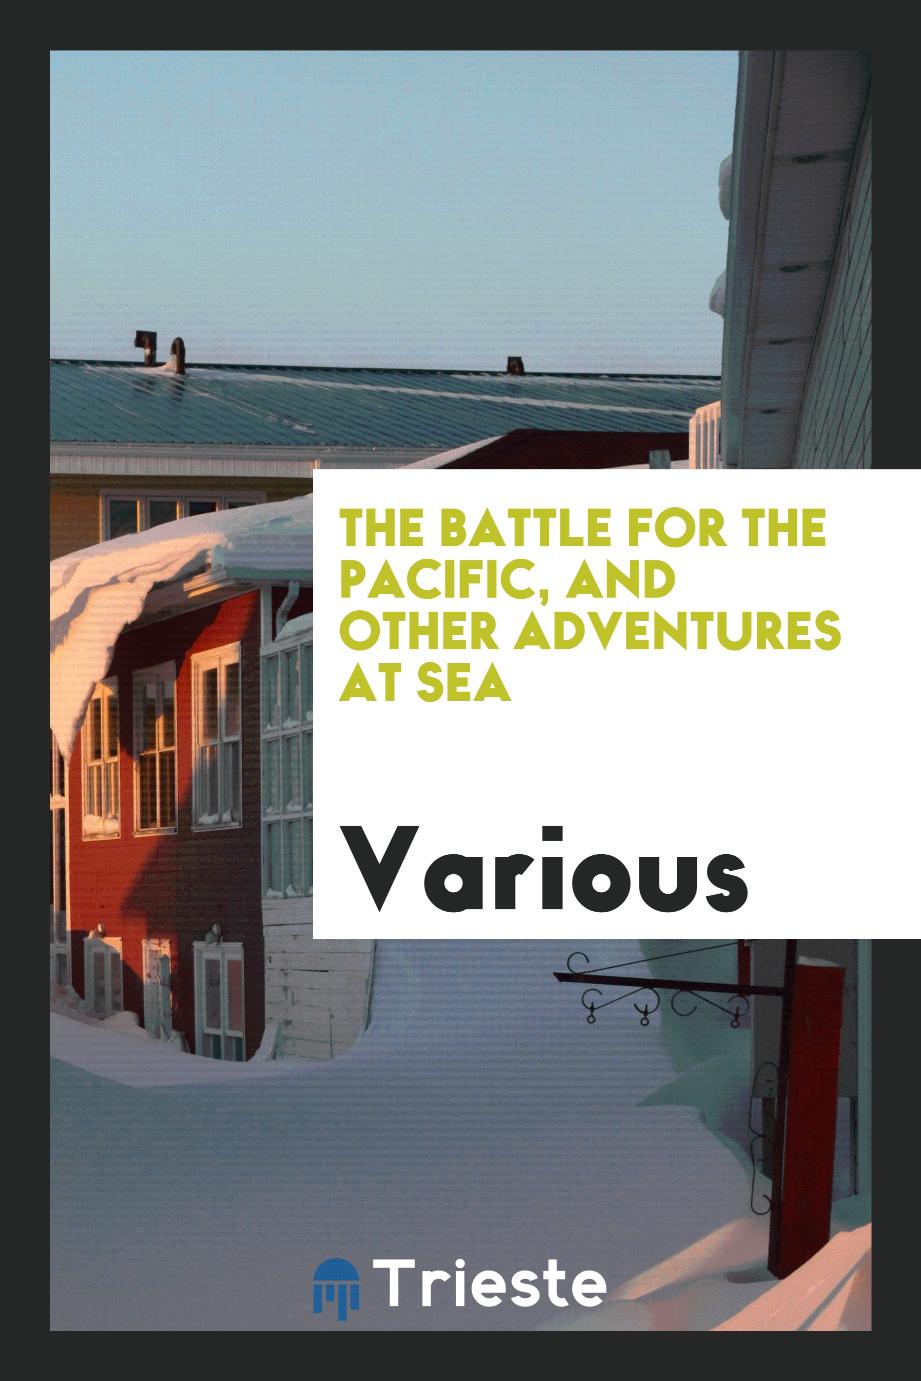 The Battle for the Pacific, and other adventures at sea